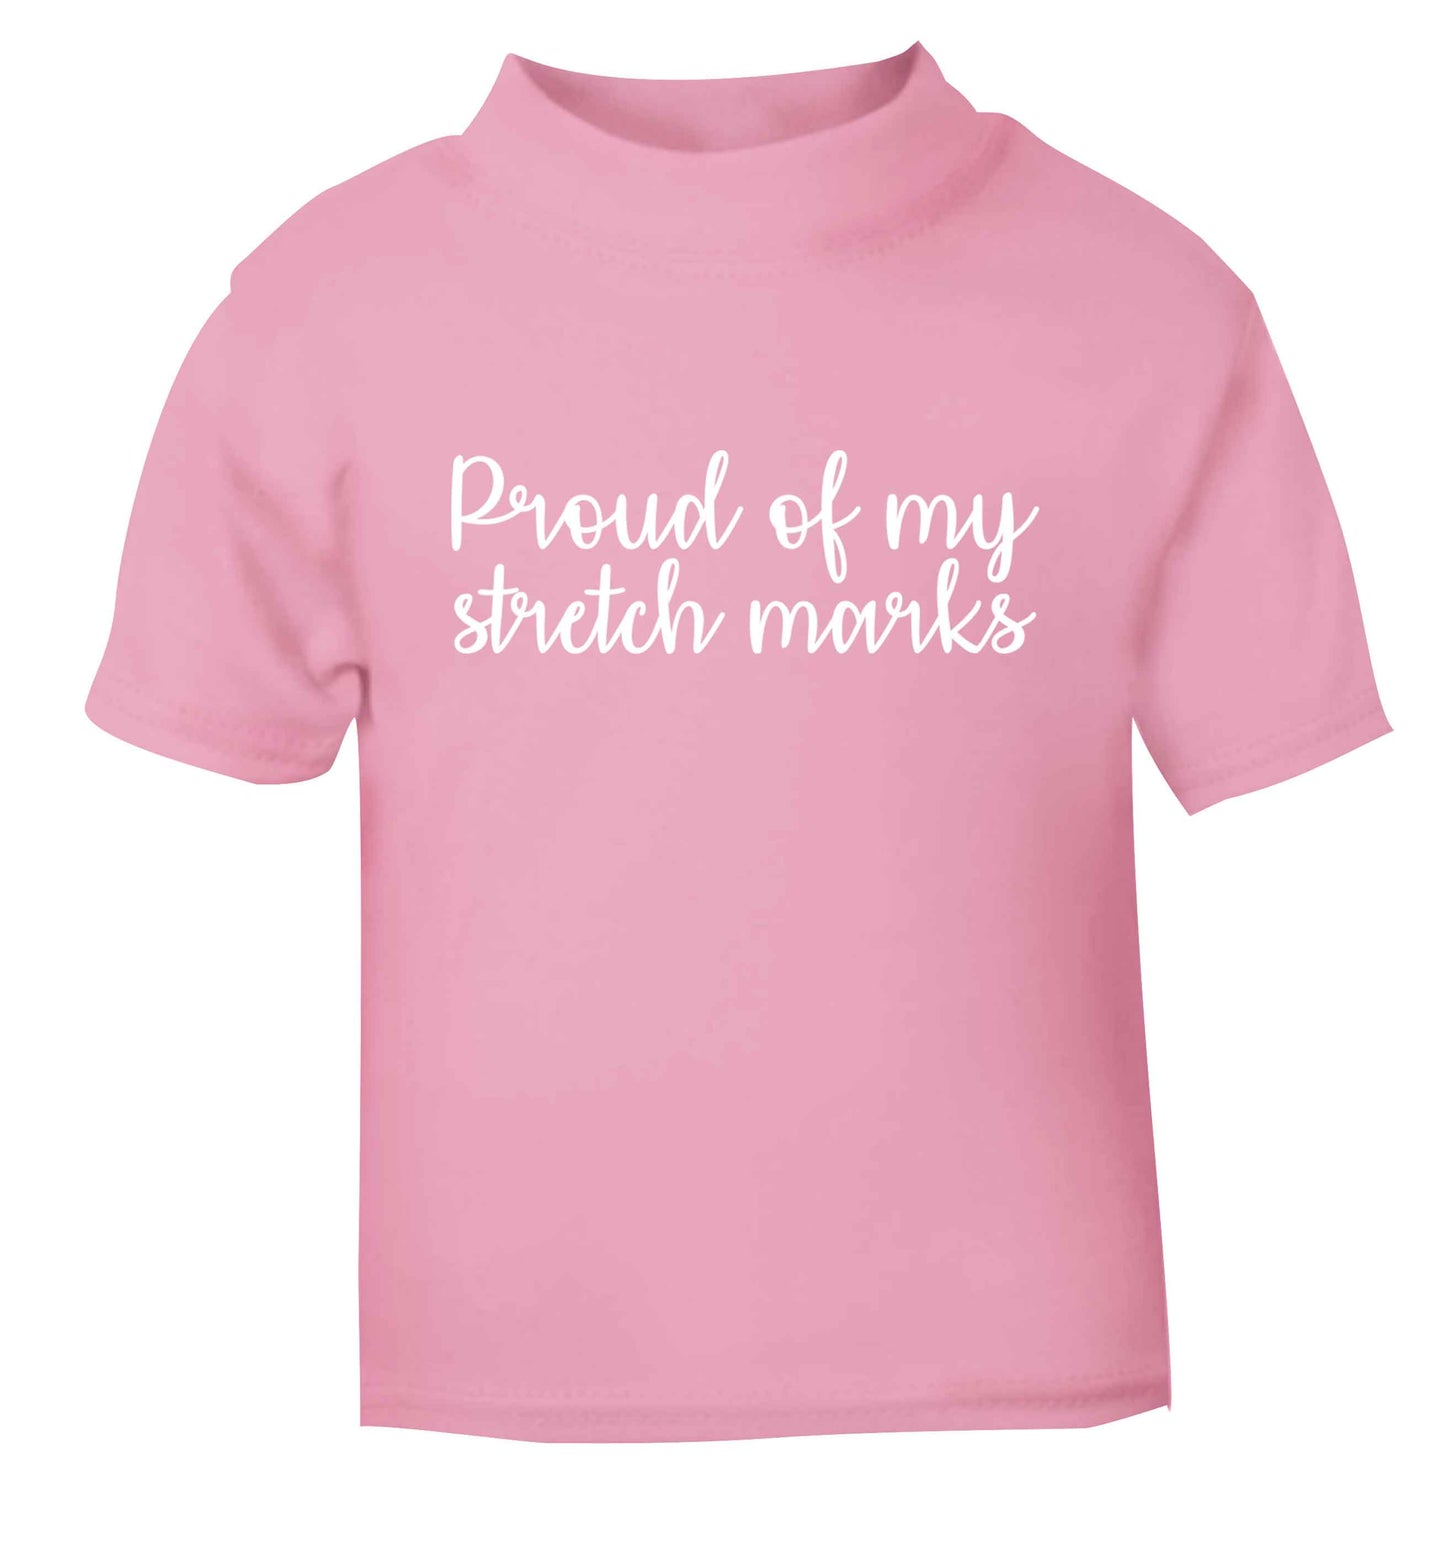 Proud of my stretch marks light pink baby toddler Tshirt 2 Years